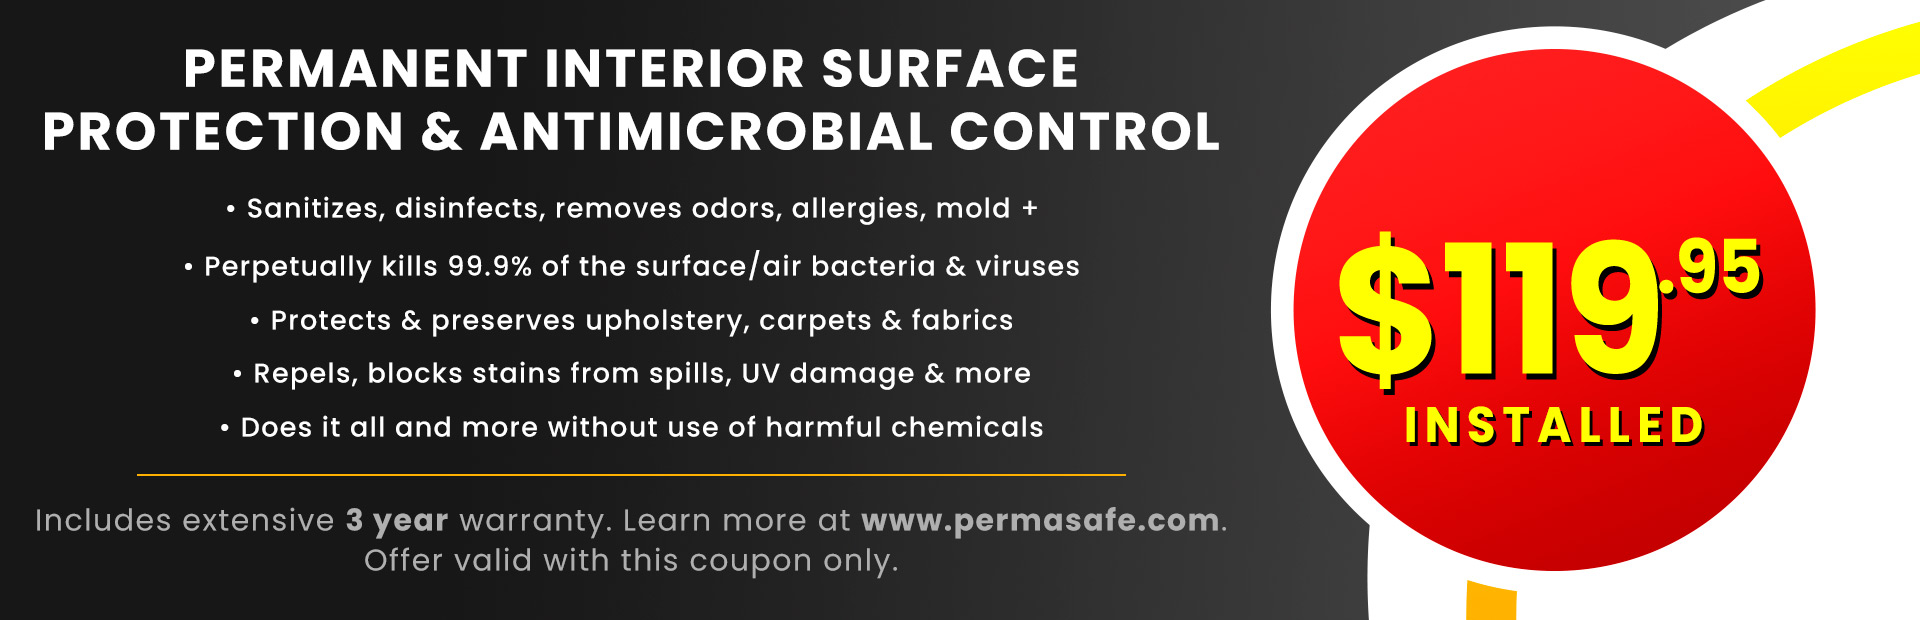 Permanent Interior Surface Protection & Antimicrobial Control